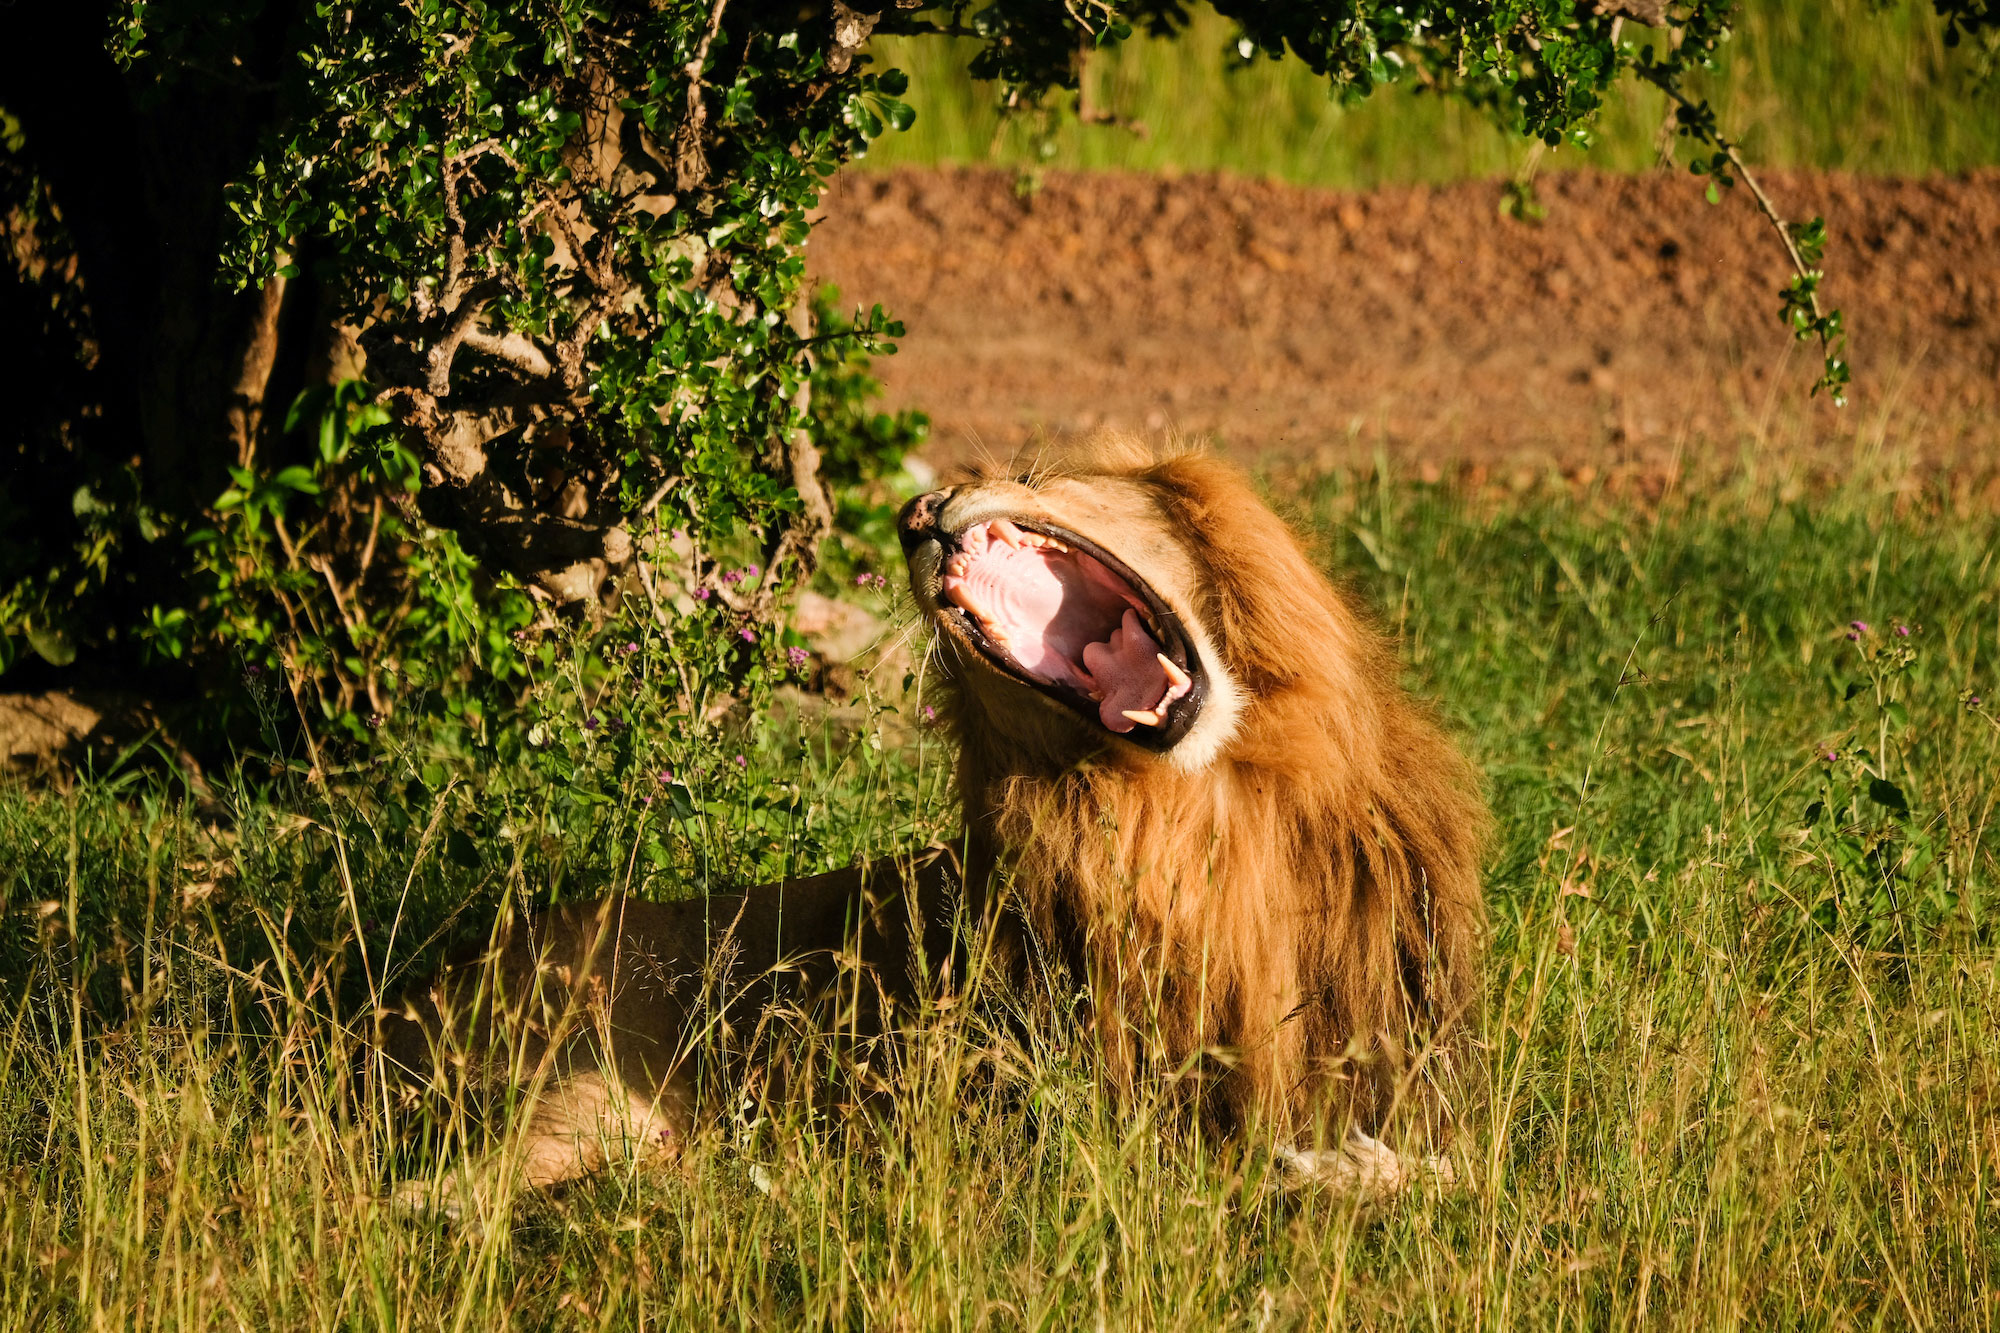 A lion yawns as it lays in the grass